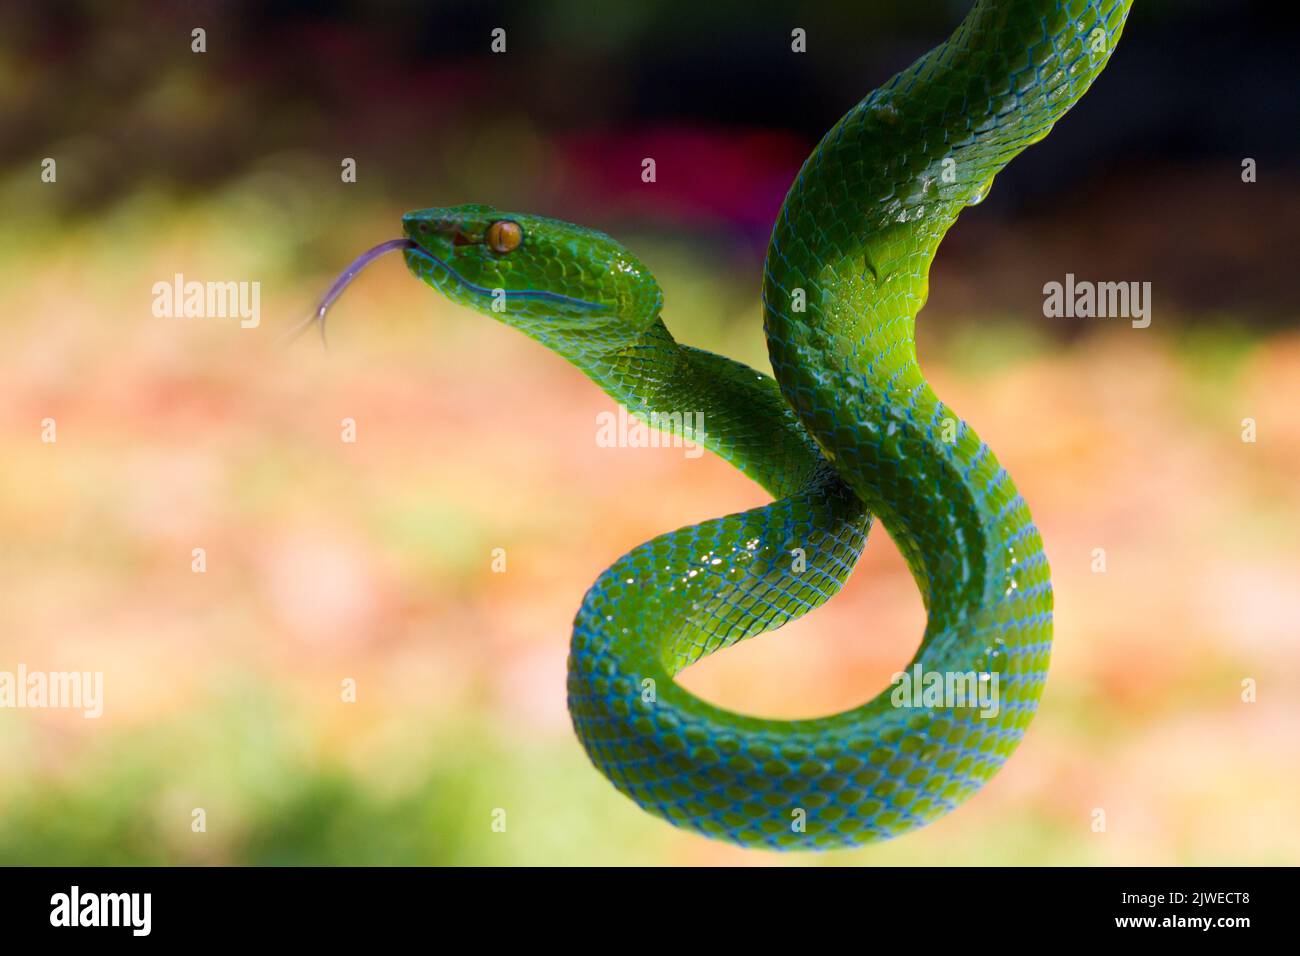 Close-up of a green tree pit viper on a branch, Indonesia Stock Photo